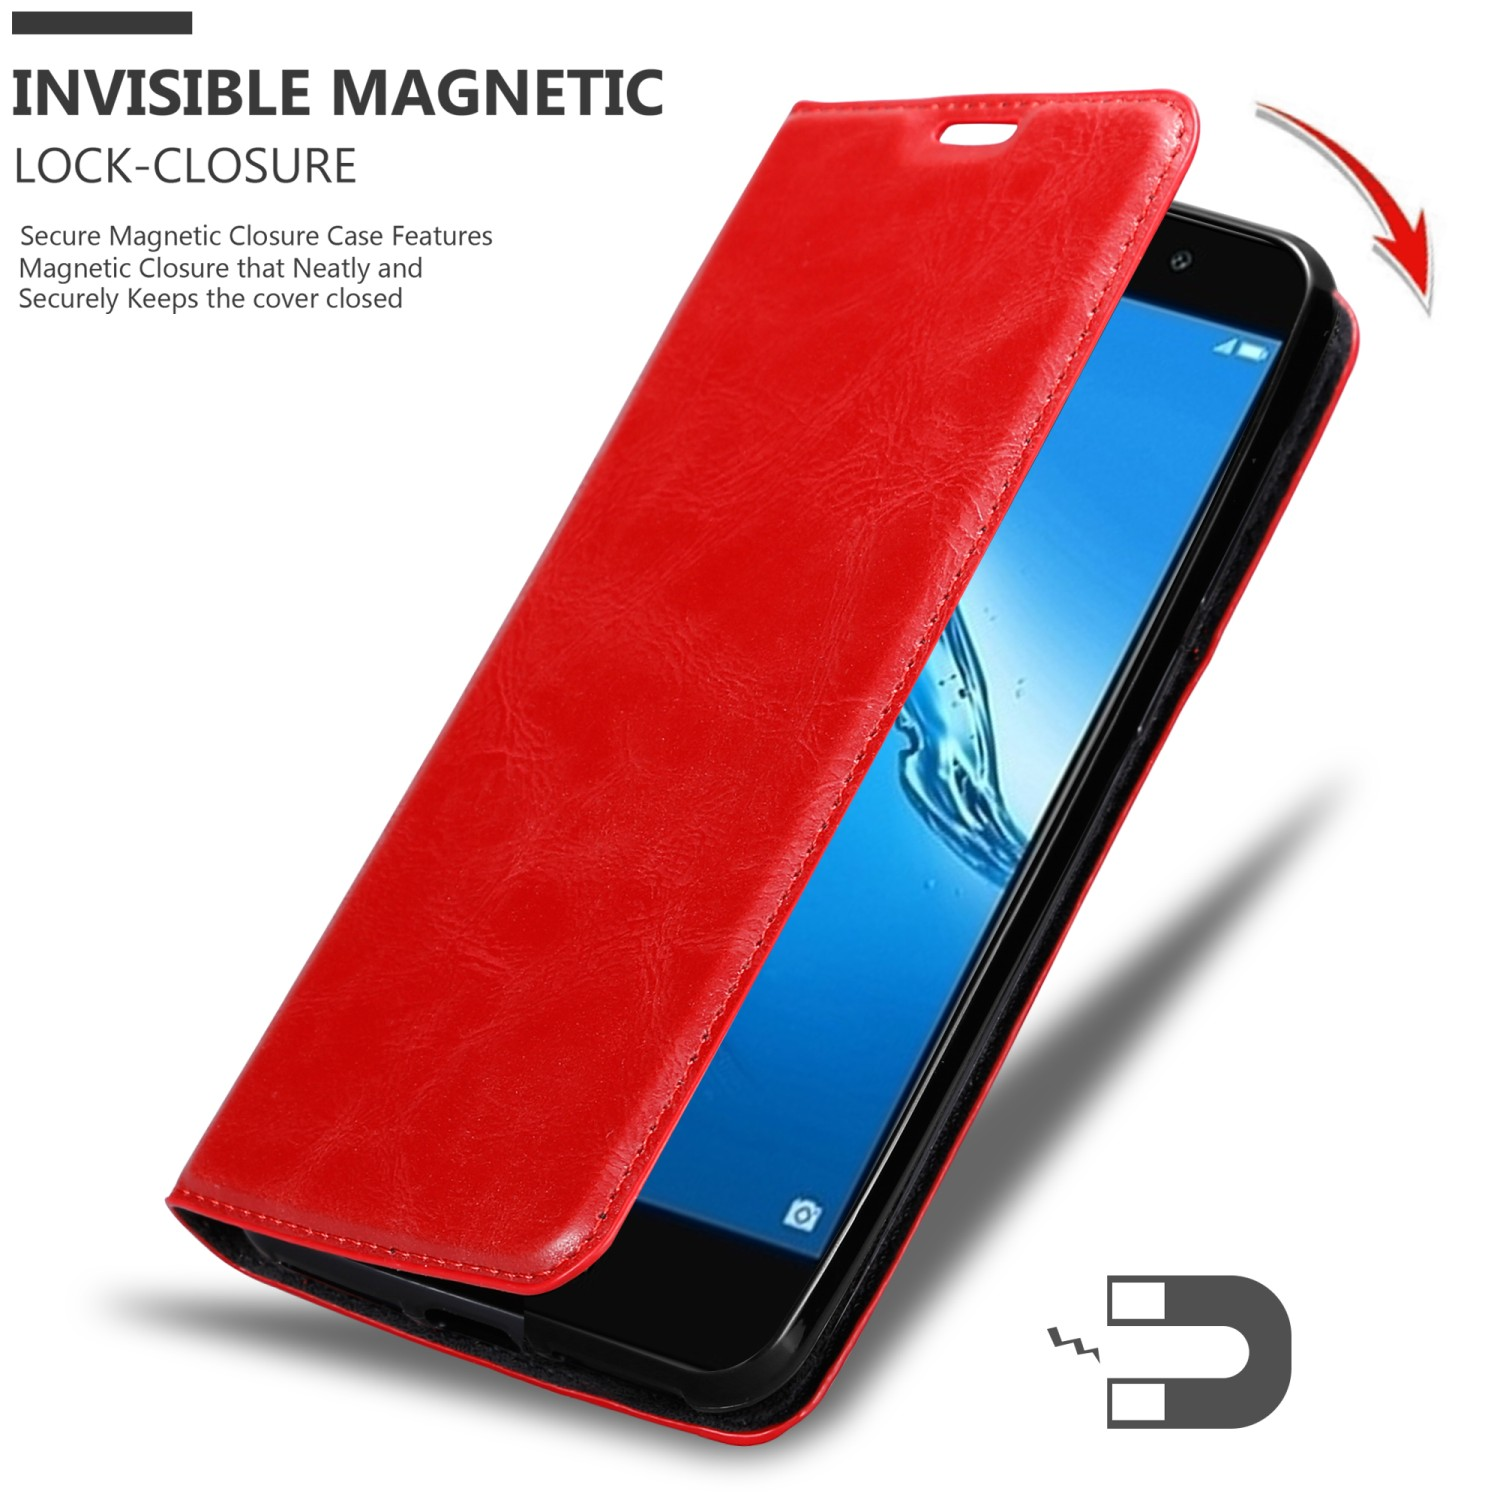 CADORABO Book Hülle Magnet, Invisible Huawei, PRIME ROT Y7 Bookcover, 2017, APFEL